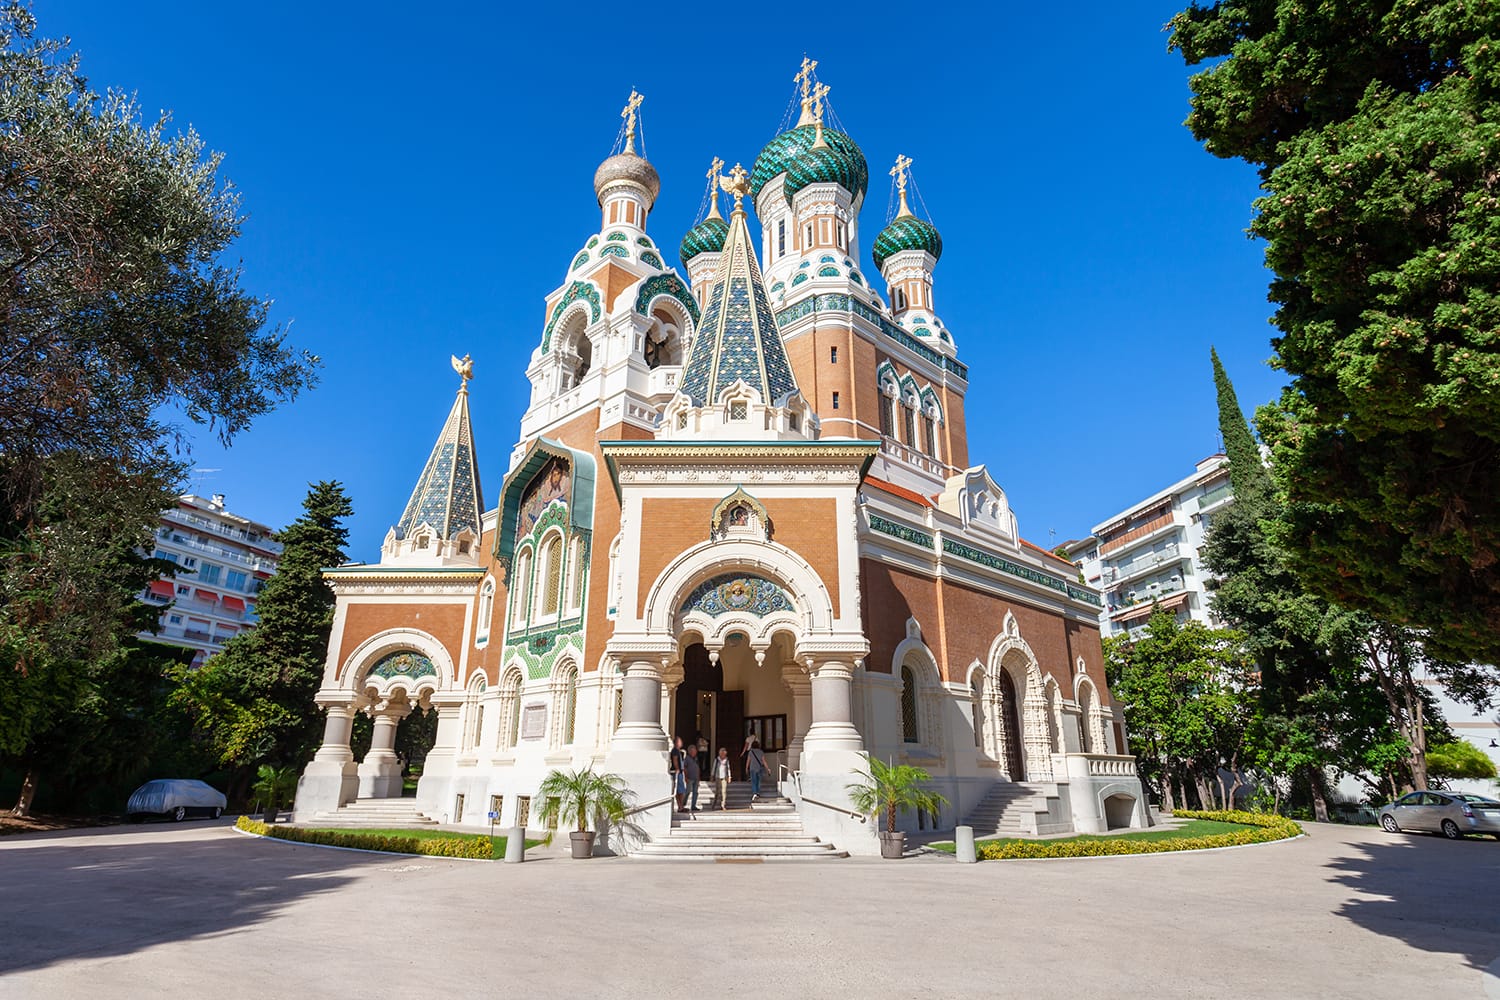 St Nicholas Orthodox Cathedral in Nice, Cote d'Azur, France